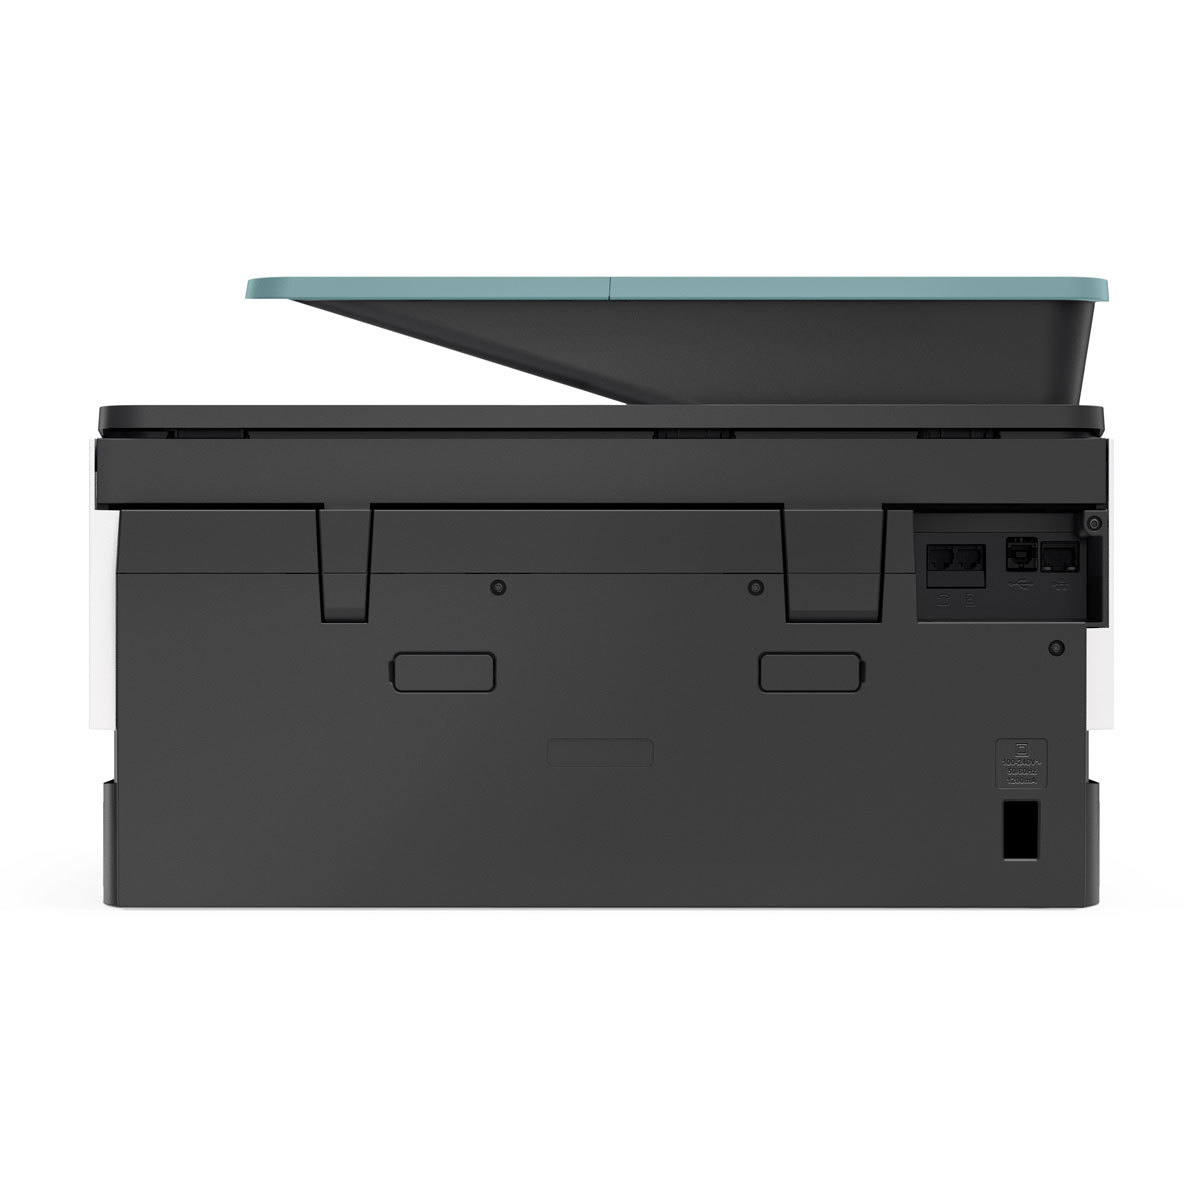 Buy HP OfficeJet 9015 All In One Wireless Printer at costco.co.uk